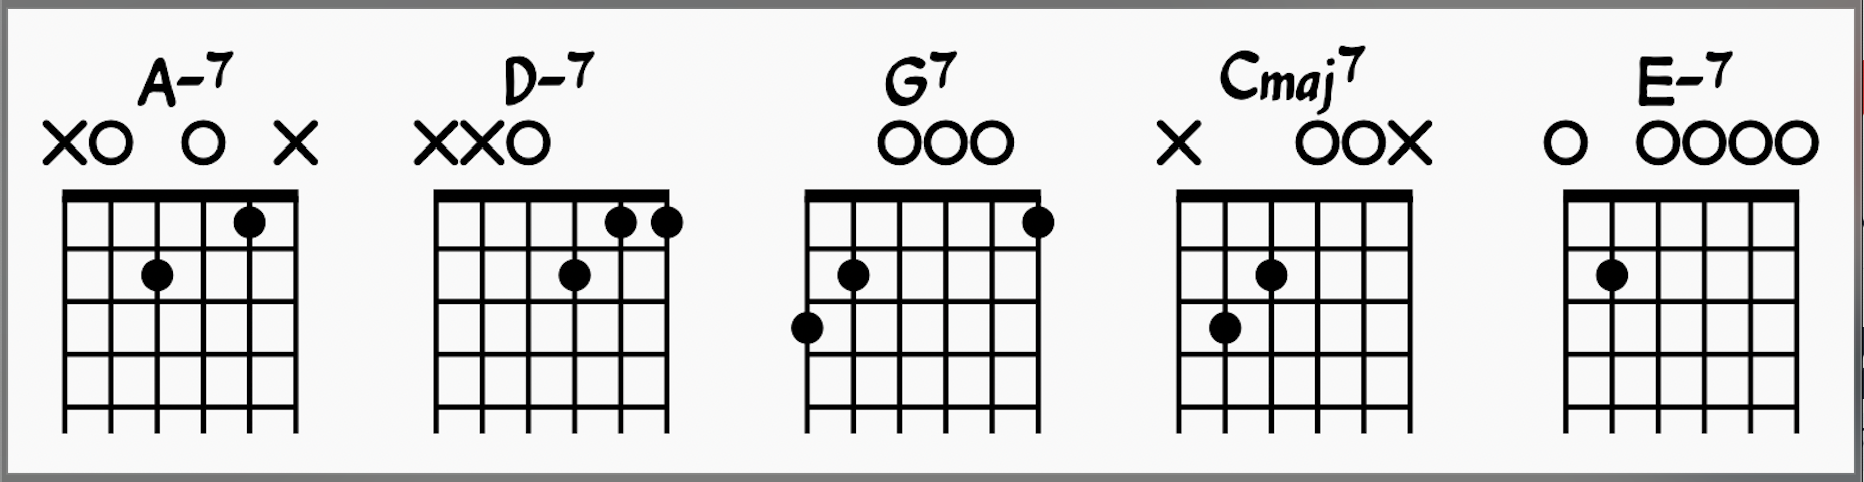 Chord shapes for A-7, D-7, G7, and Cmaj7